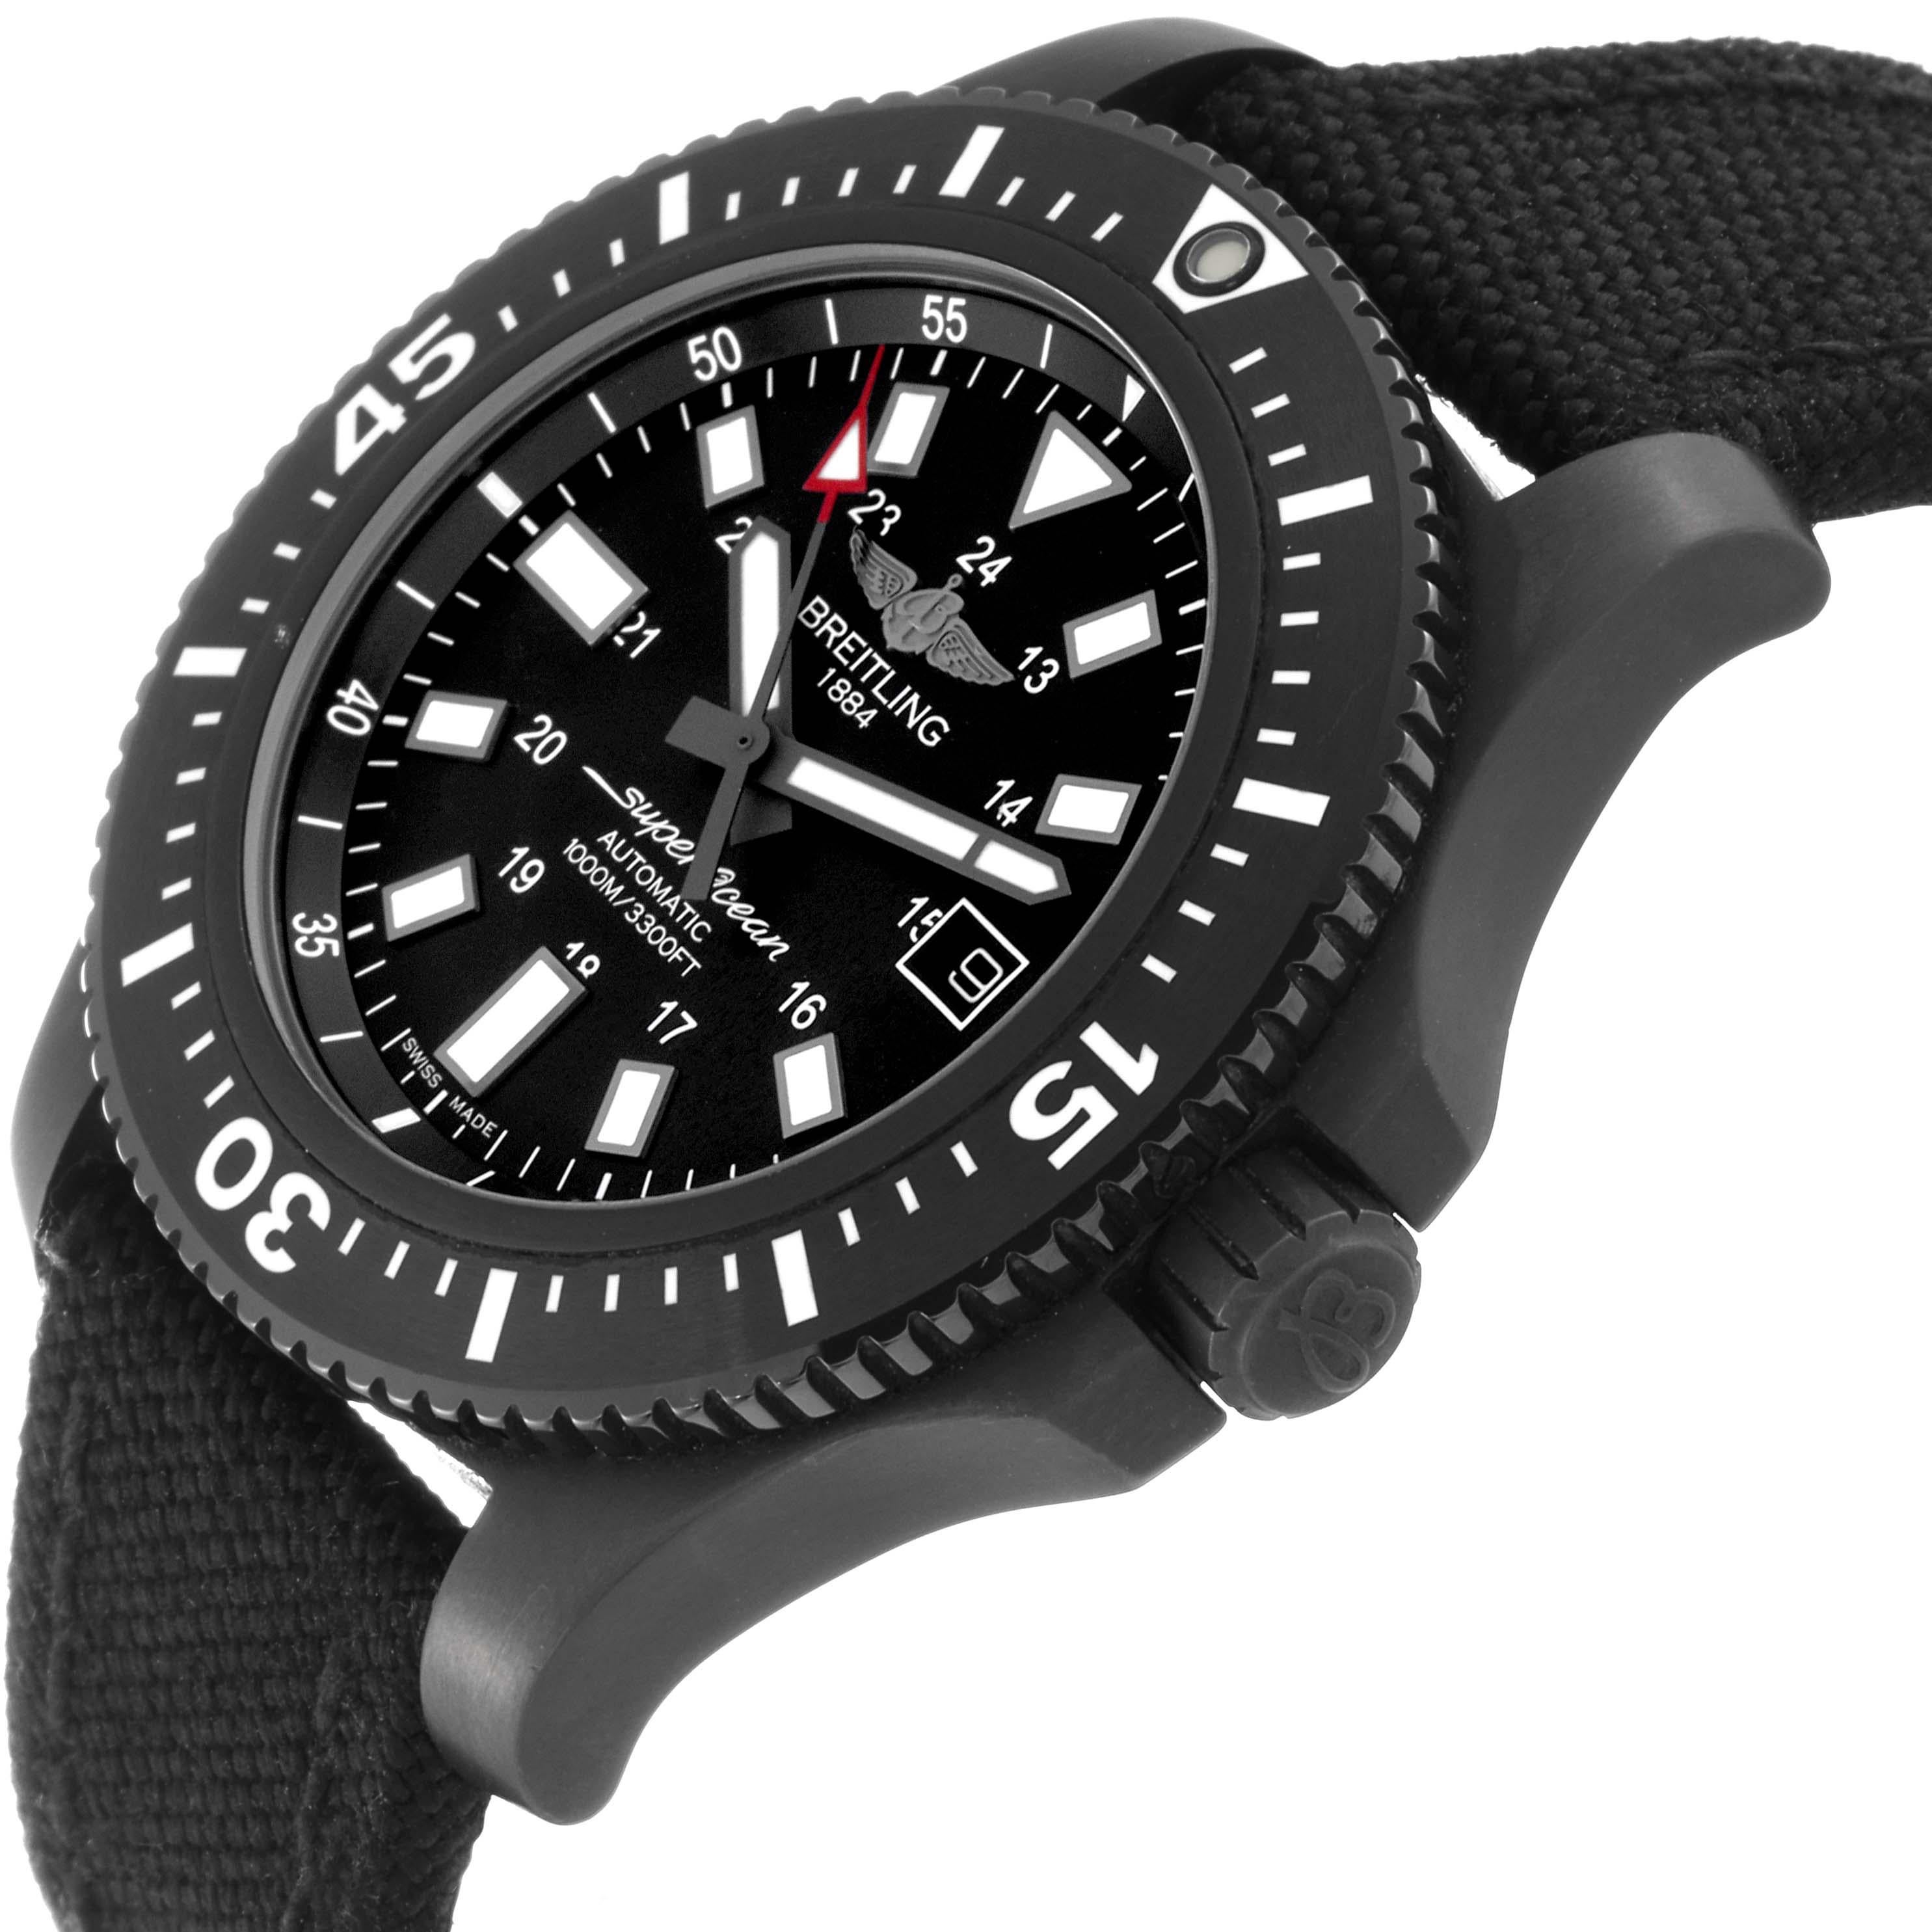 Breitling Superocean 44 DLC Steel Mens Watch M17393. Authomatic self-winding movement. DLC coated stainless steel case 44.0 mm in diameter. Case thickness: 14.2 mm. Black ceramic unidirectional revolving bezel. 0-60 elapsed-time. Scratch resistant